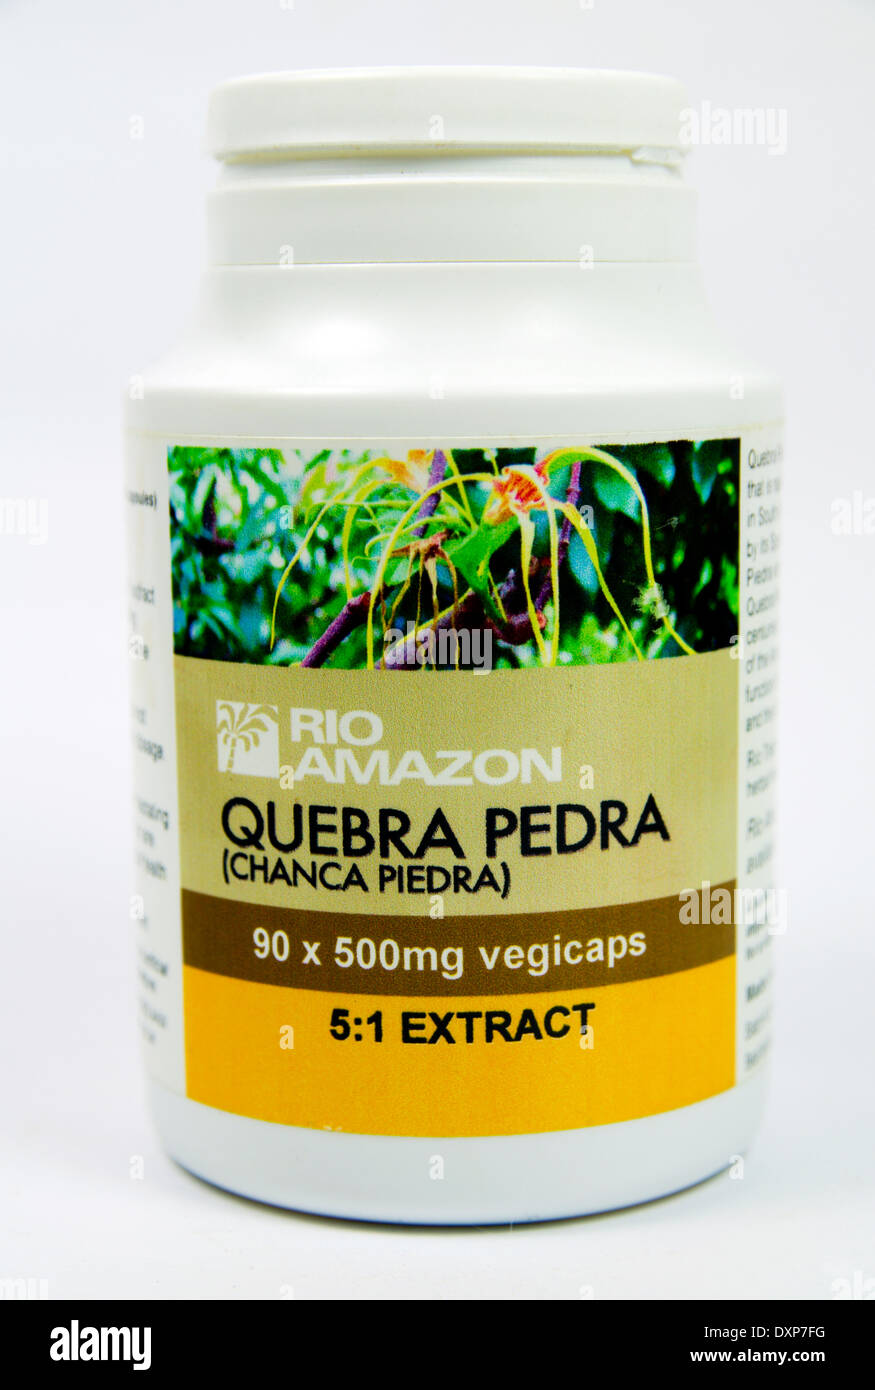 Quebra Pedra herbal remedy from the Amazon used to treat Kidney Stones and Gall Bladder problems. Stock Photo